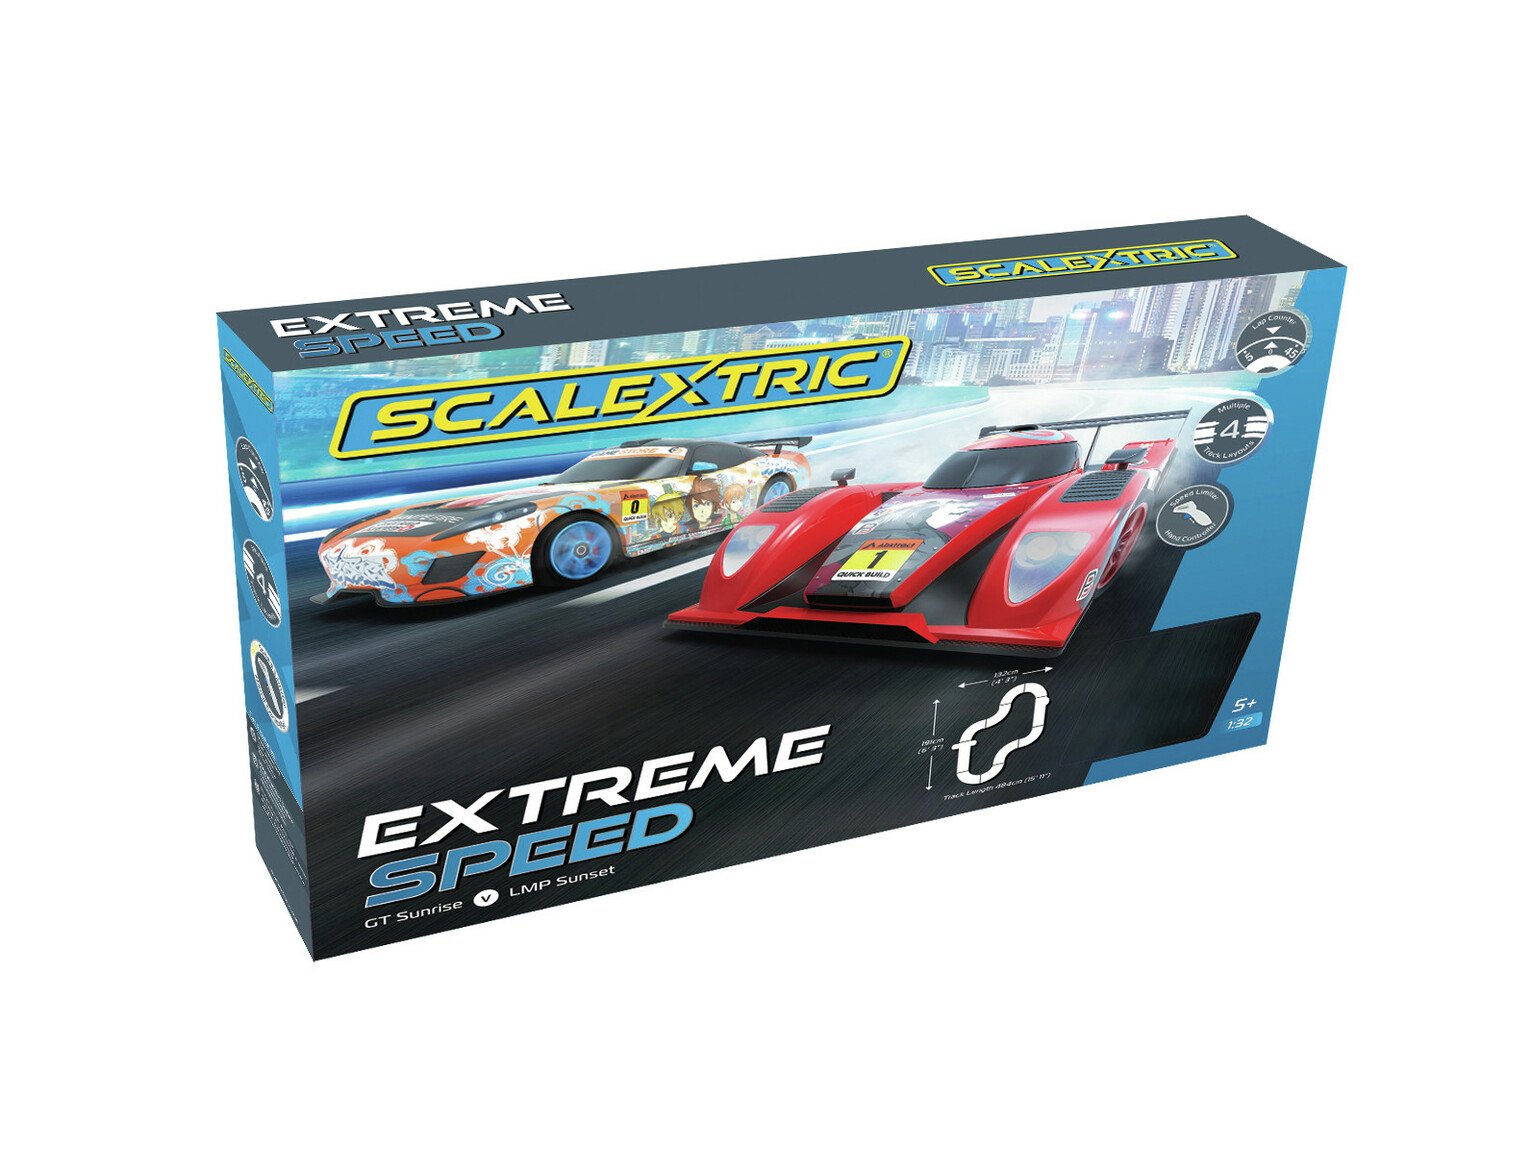 chad valley scalextric cars